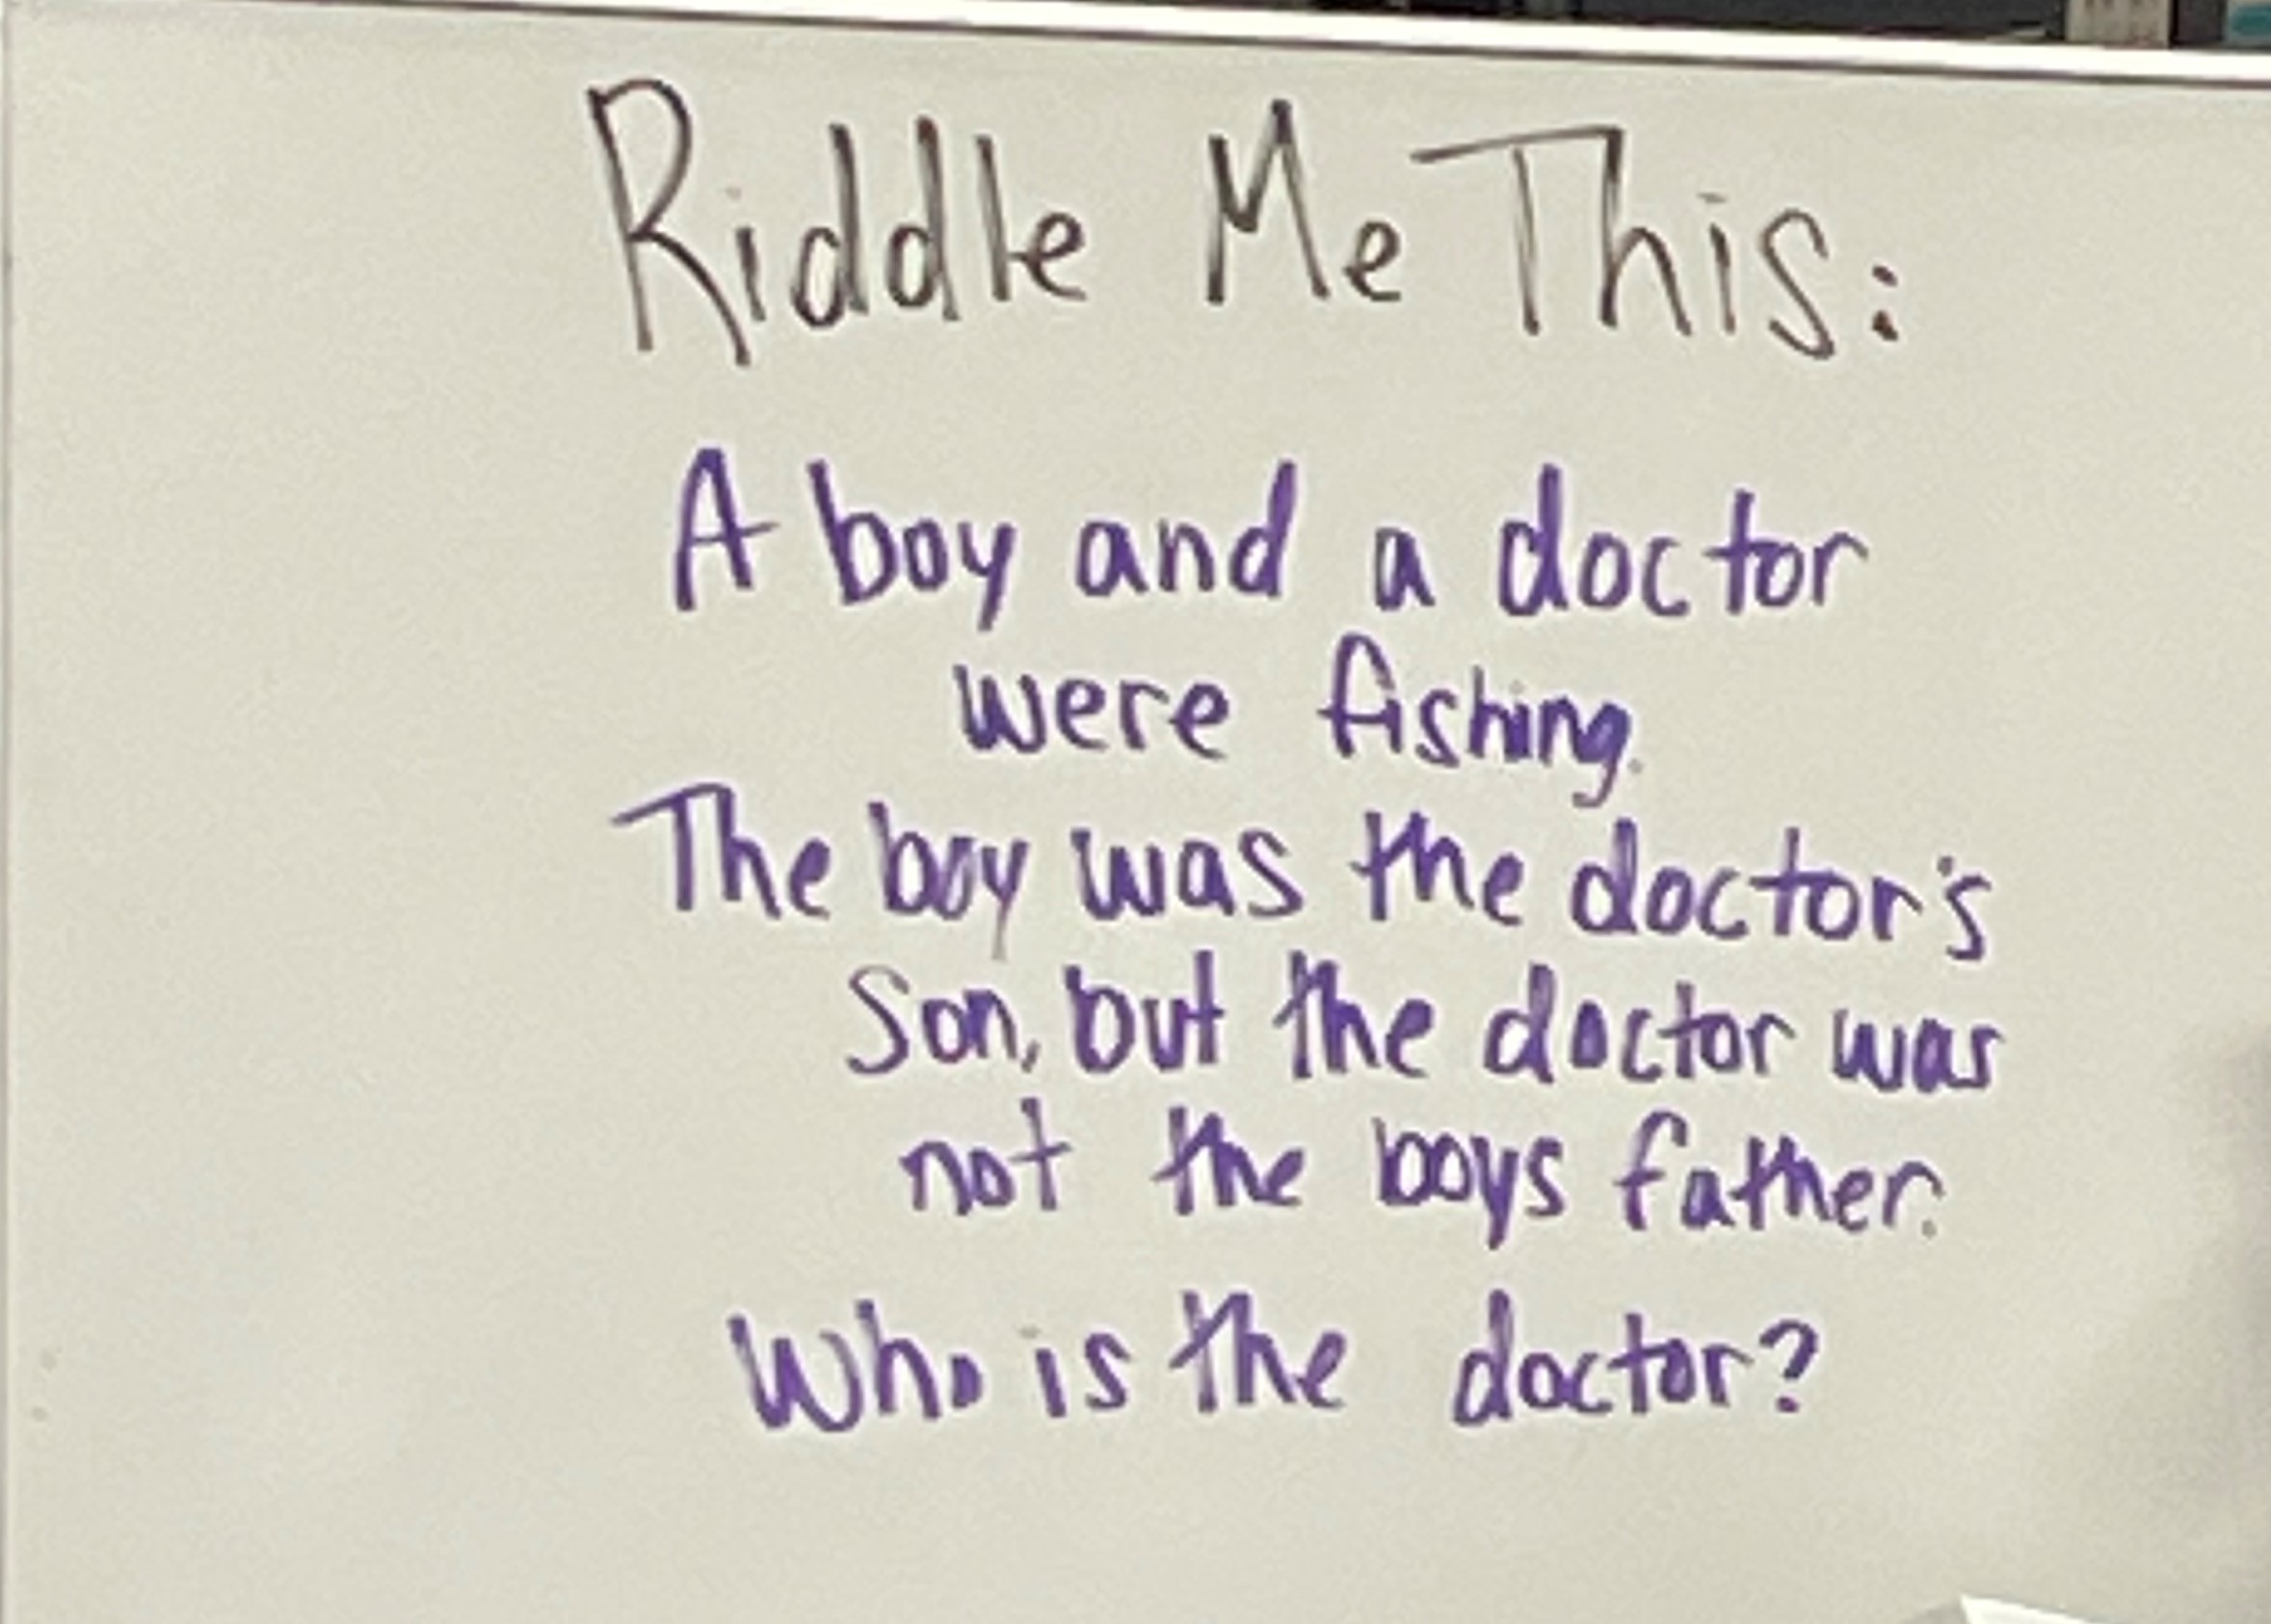 There is something seriously wrong when a riddle is still a riddle after 50 years.